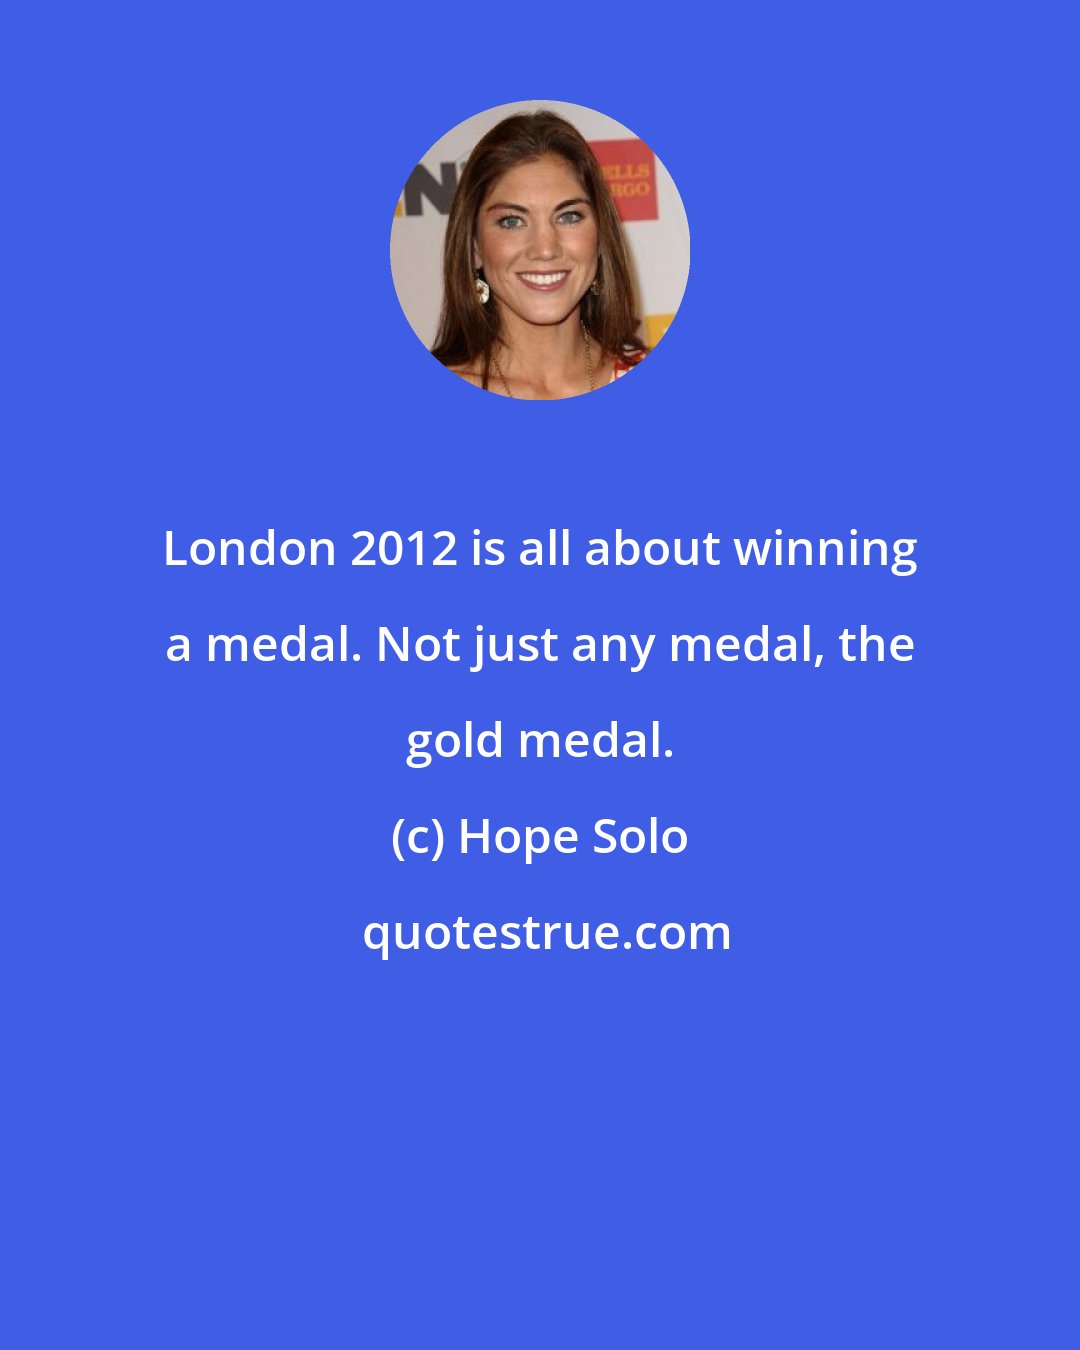 Hope Solo: London 2012 is all about winning a medal. Not just any medal, the gold medal.